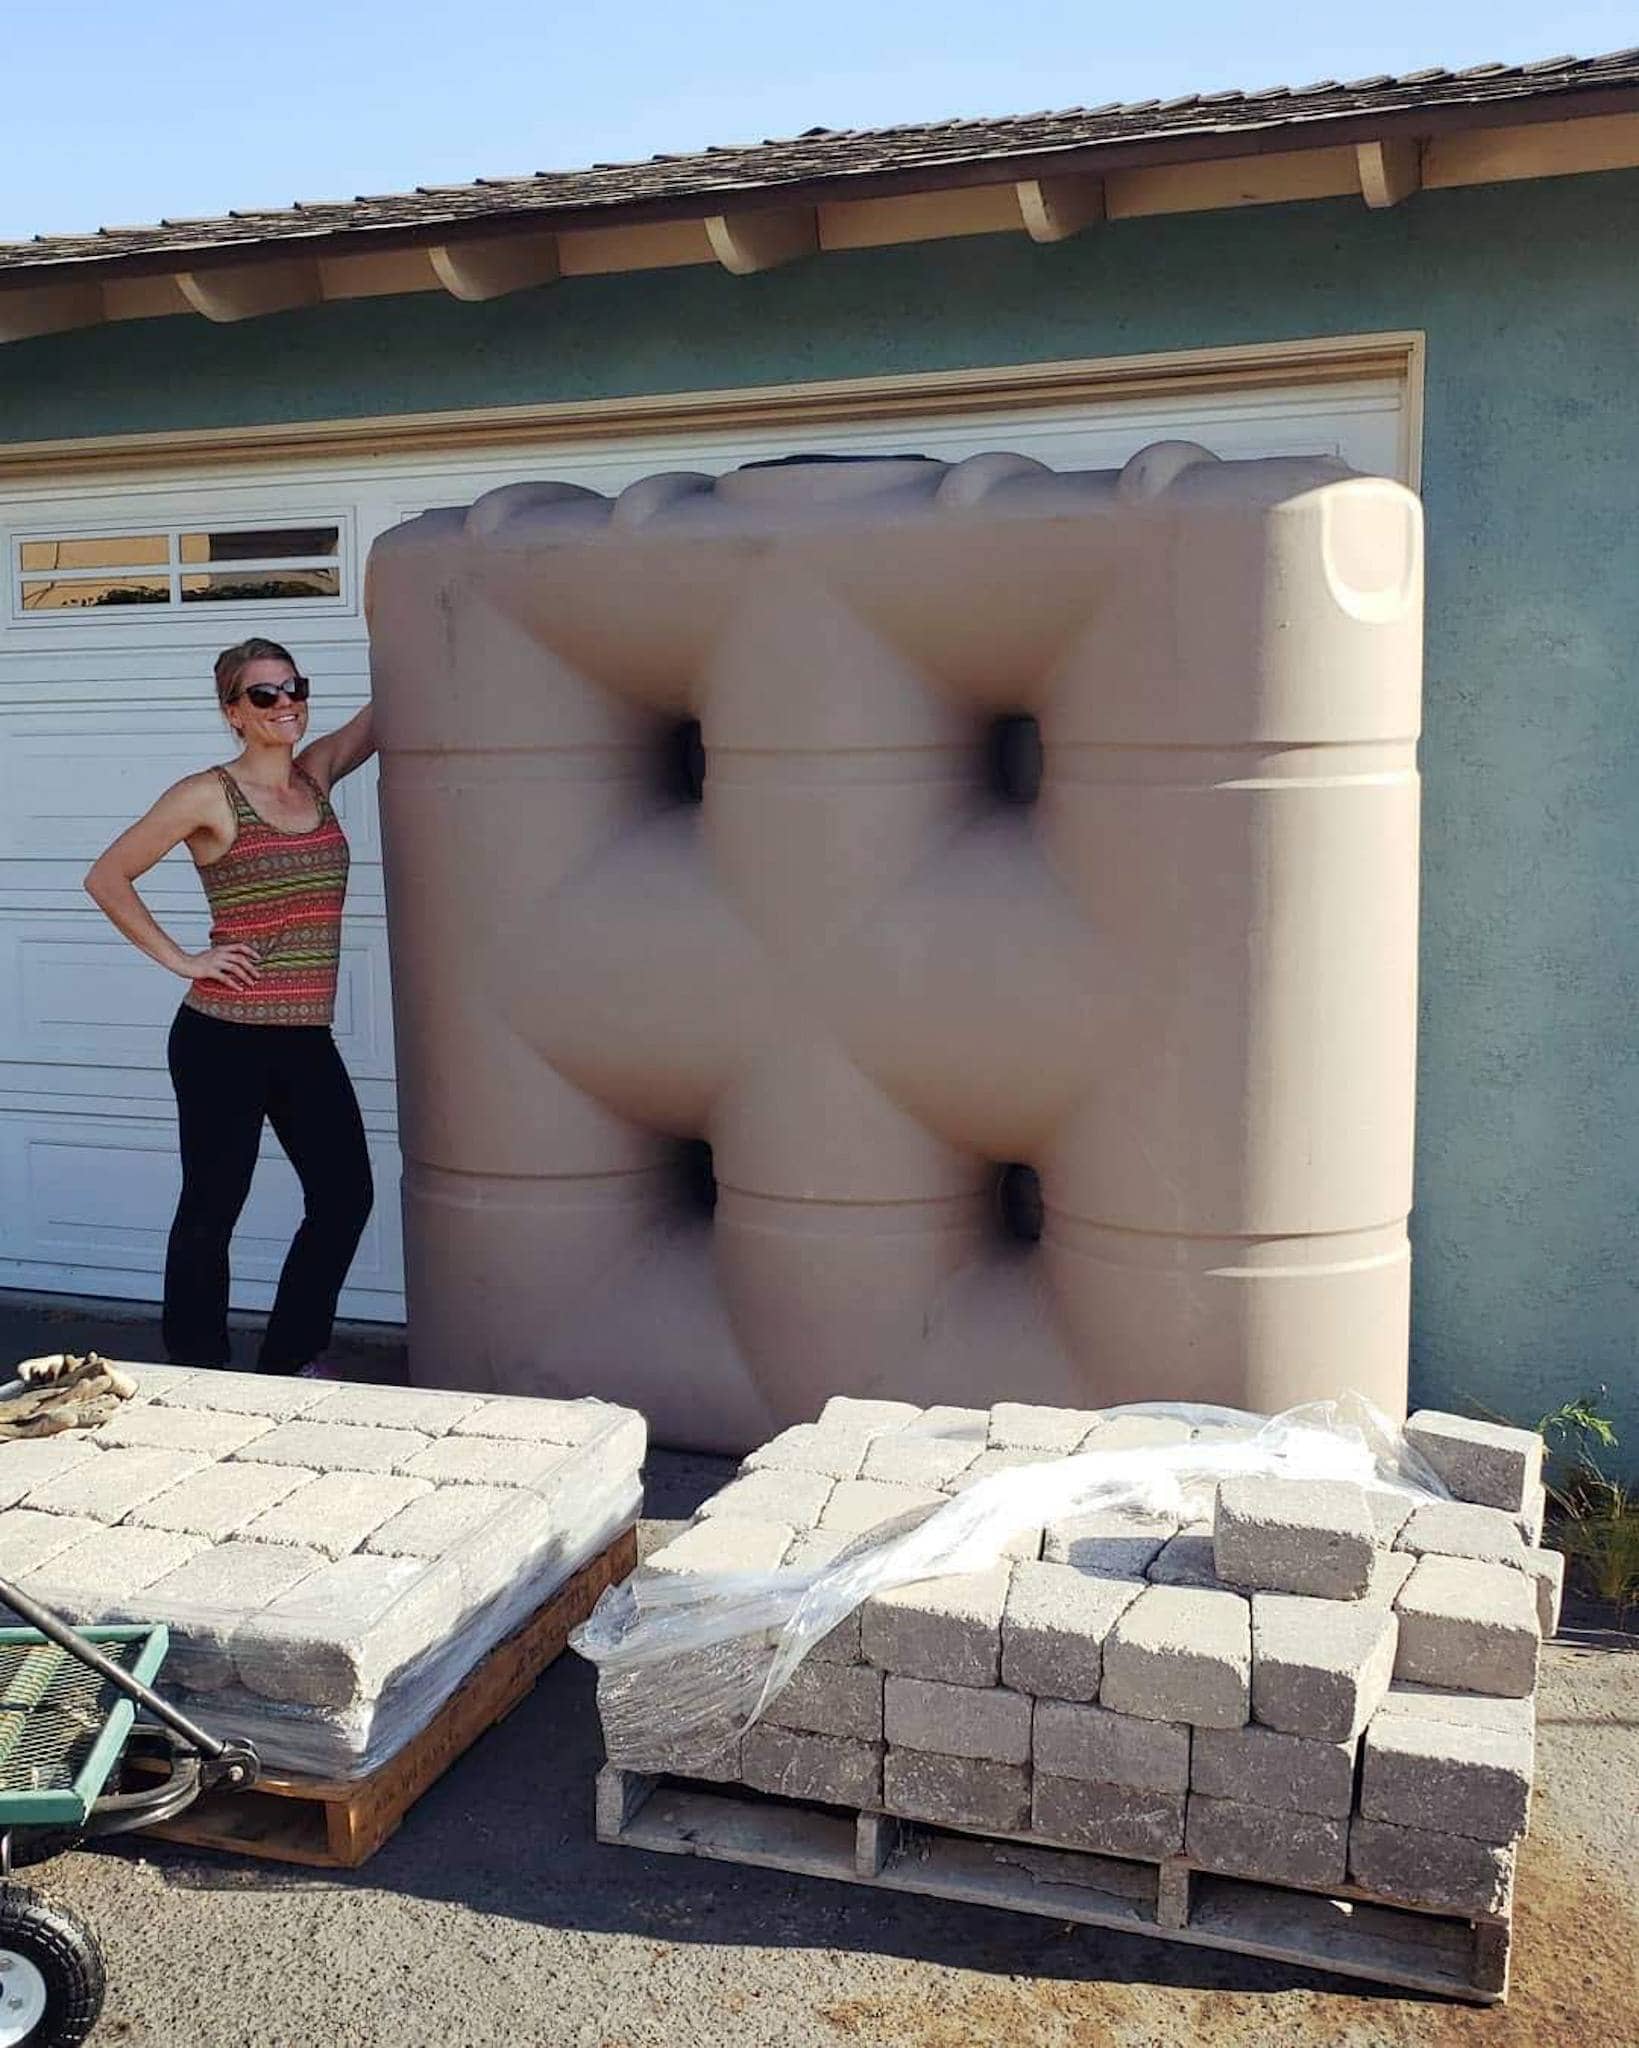 DeannaCat is standing next to the newly purchased 530 gallon slimline rain tank. This is a great tank for rainwater collection in narrow spaces. There are two pallets of pavers and stones sitting in front of them, though these are for a separate project unrelated to the rain water tank. 